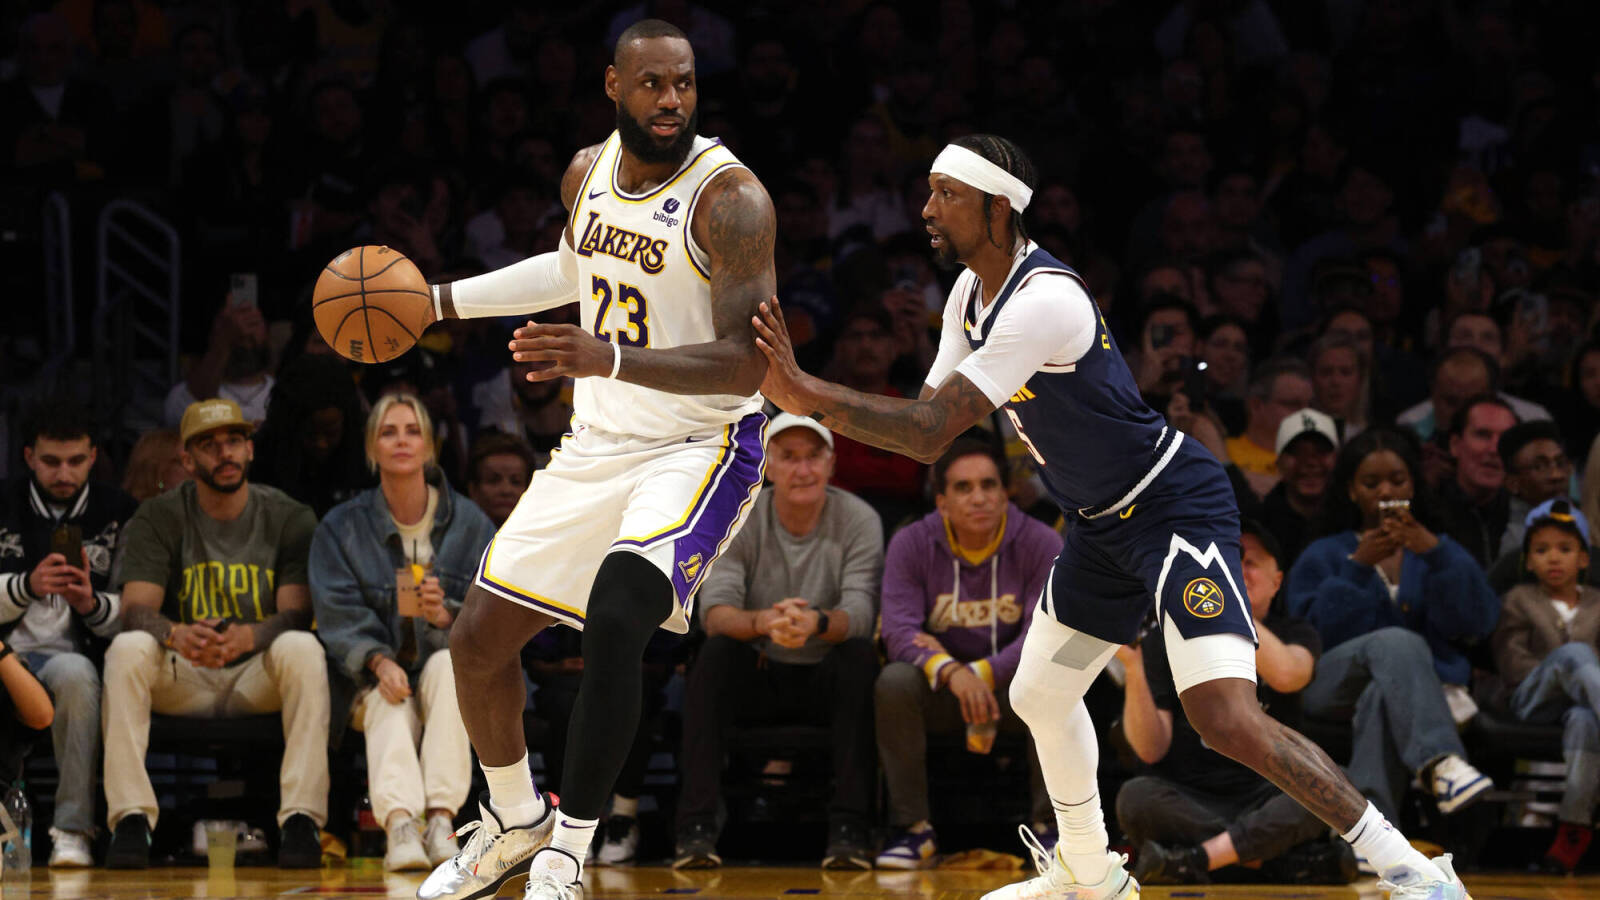 Los Angeles Lakers: LeBron James Brings Back Trauma of Ex-Golden State Warriors GM With Wild Chasedown Block